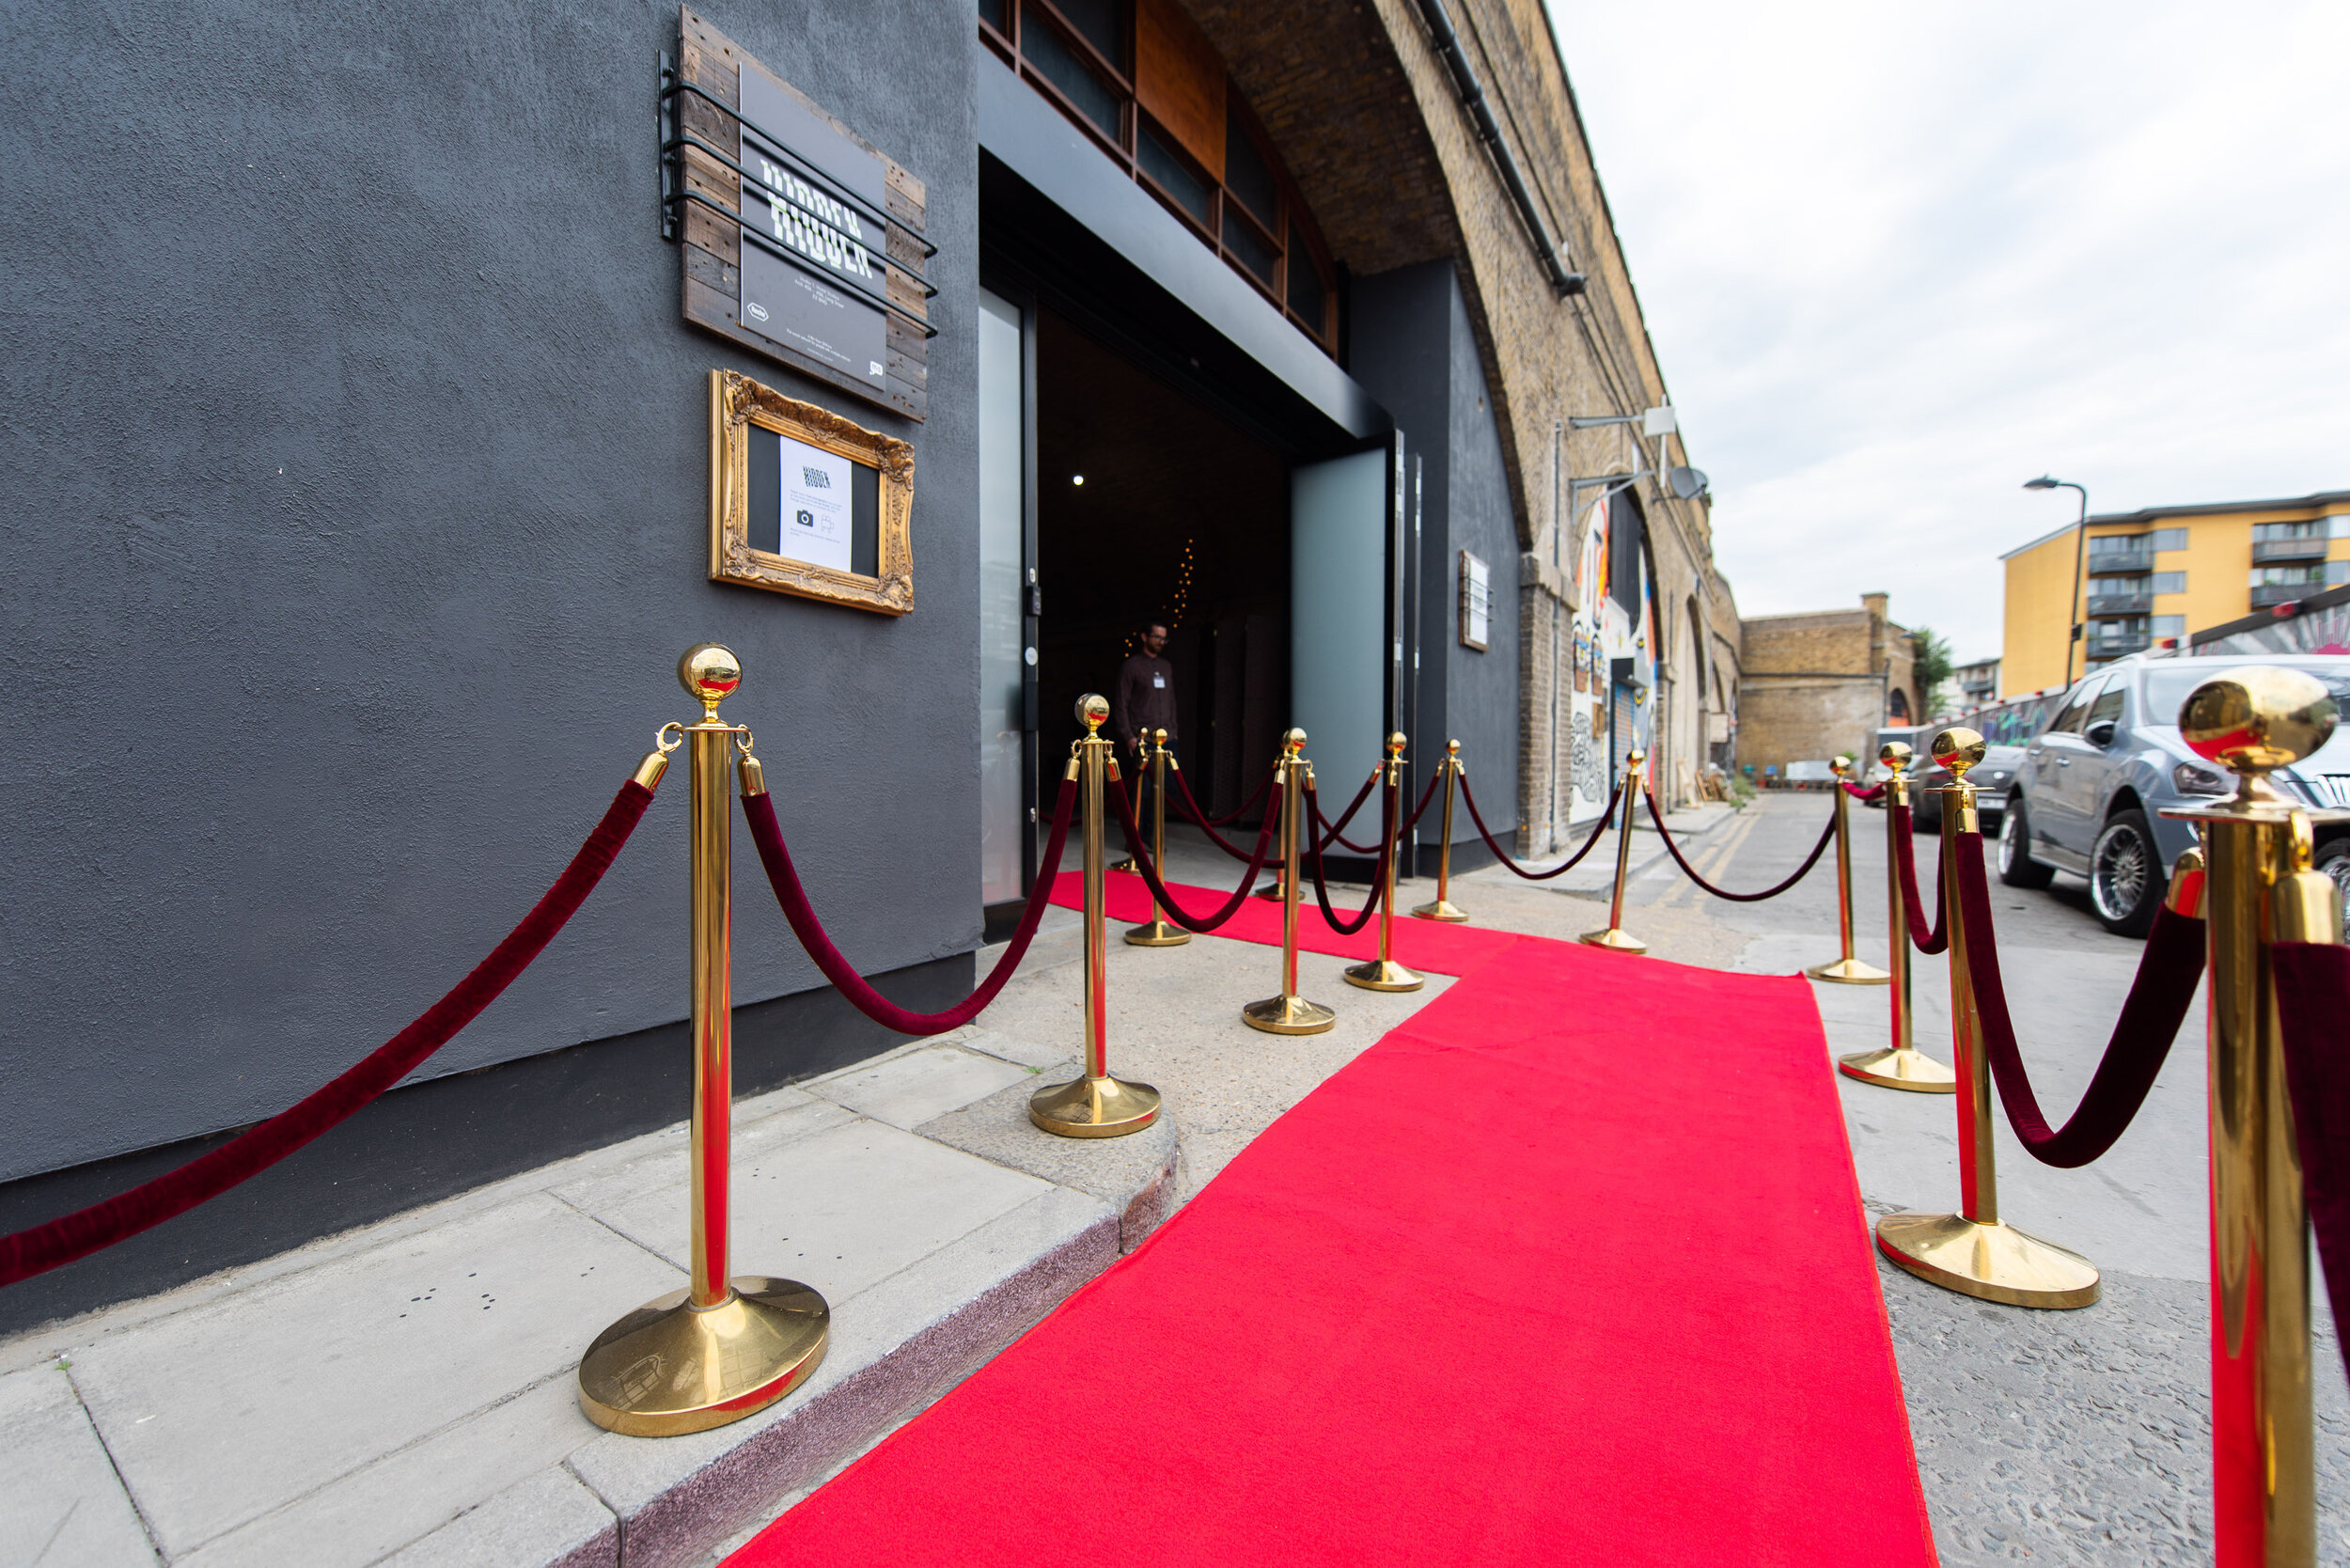 Corporate Event Venue Hire in Shoreditch / Hoxton / East London